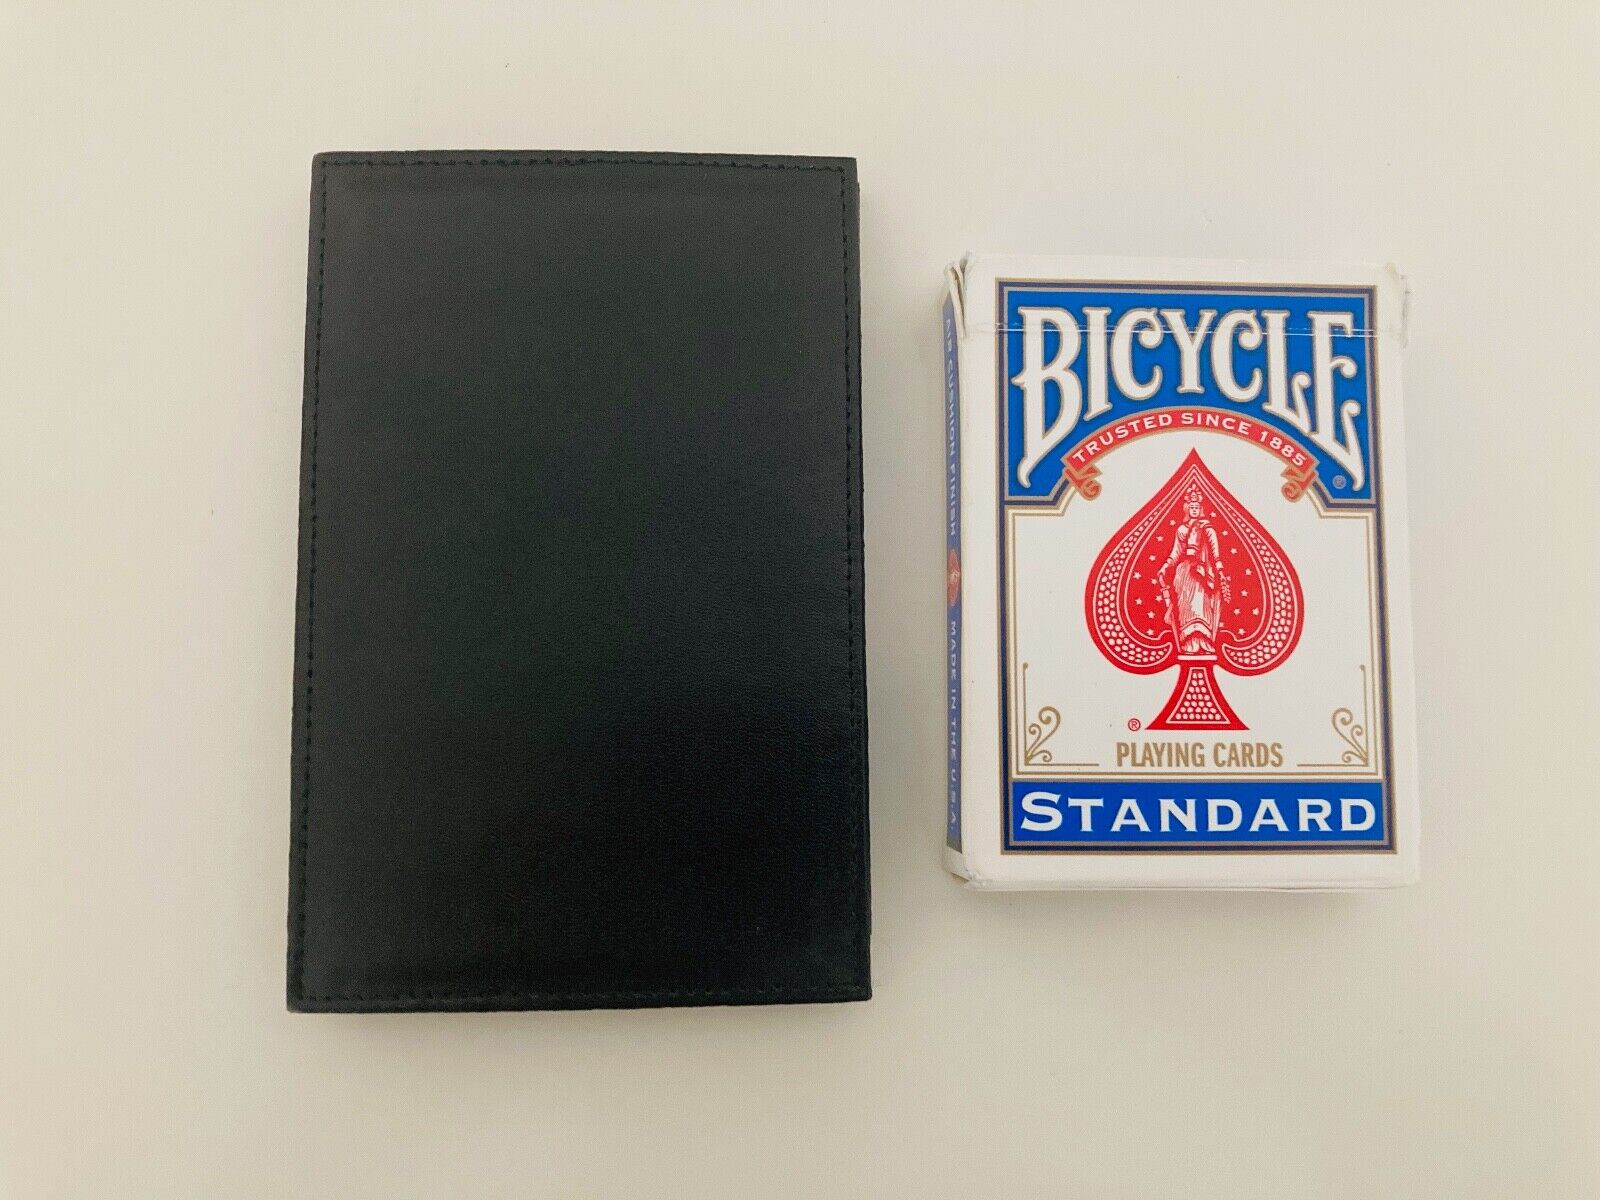 Larry Becker Insight Wallet shown closed next to Bicycle Cards Box